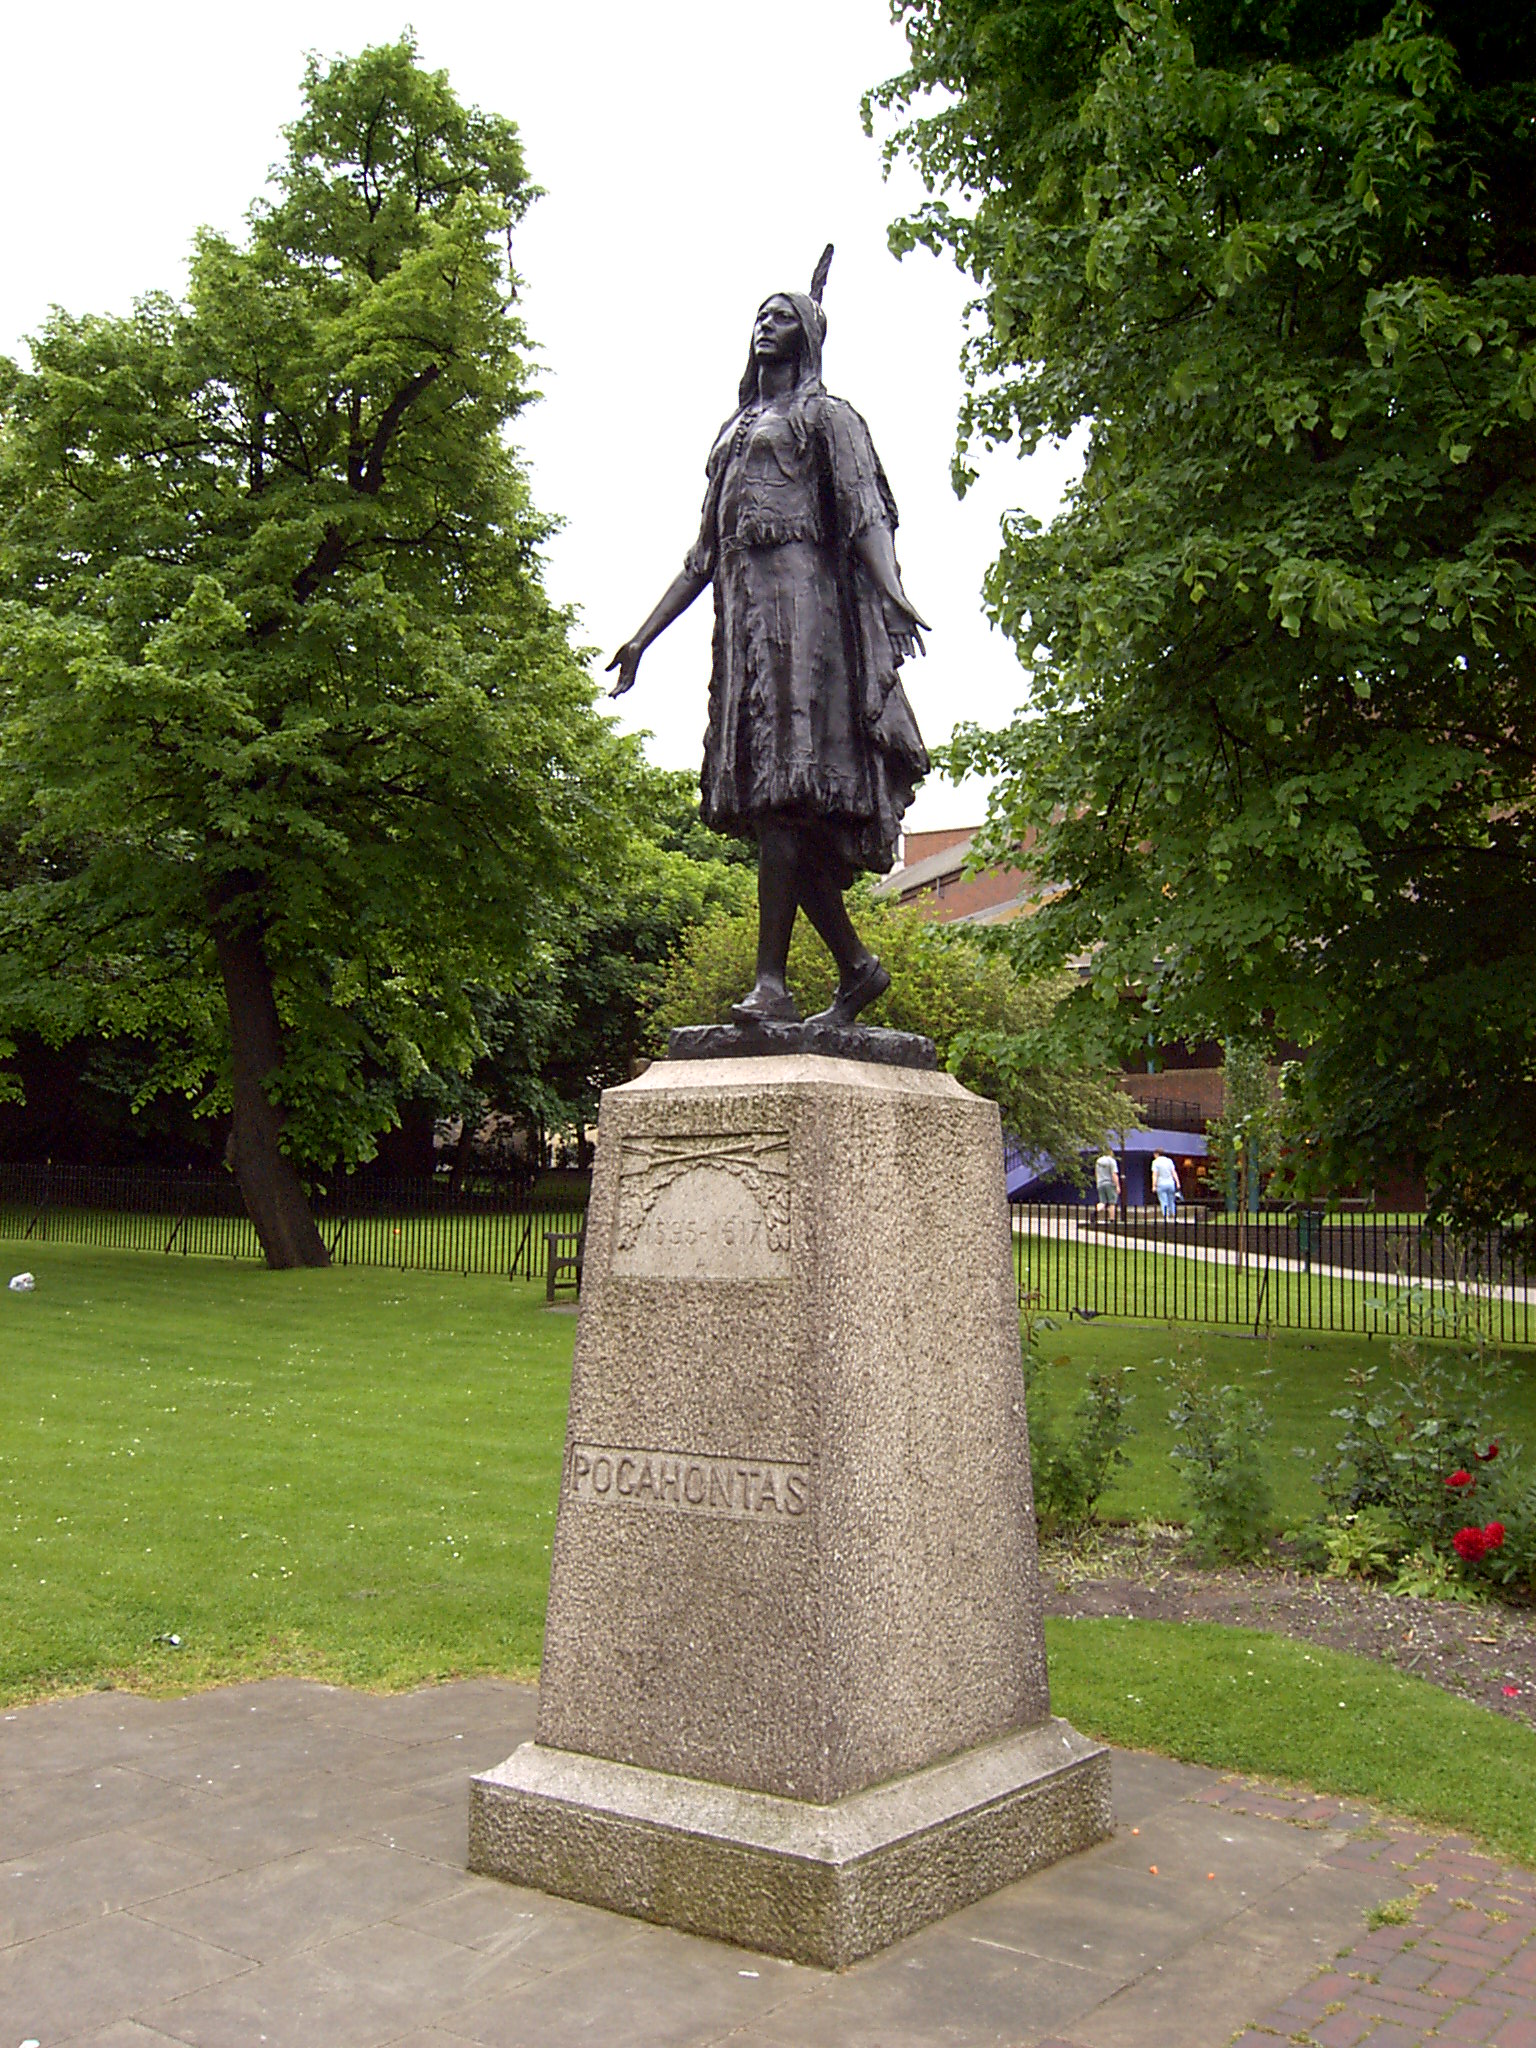 Statue of Pocahontas on a stone plinth with concrete around, grass and trees behind. She wears a dress and a feather in her hair. She holds her arms down, but with her hands raised slightly as if in greeting.